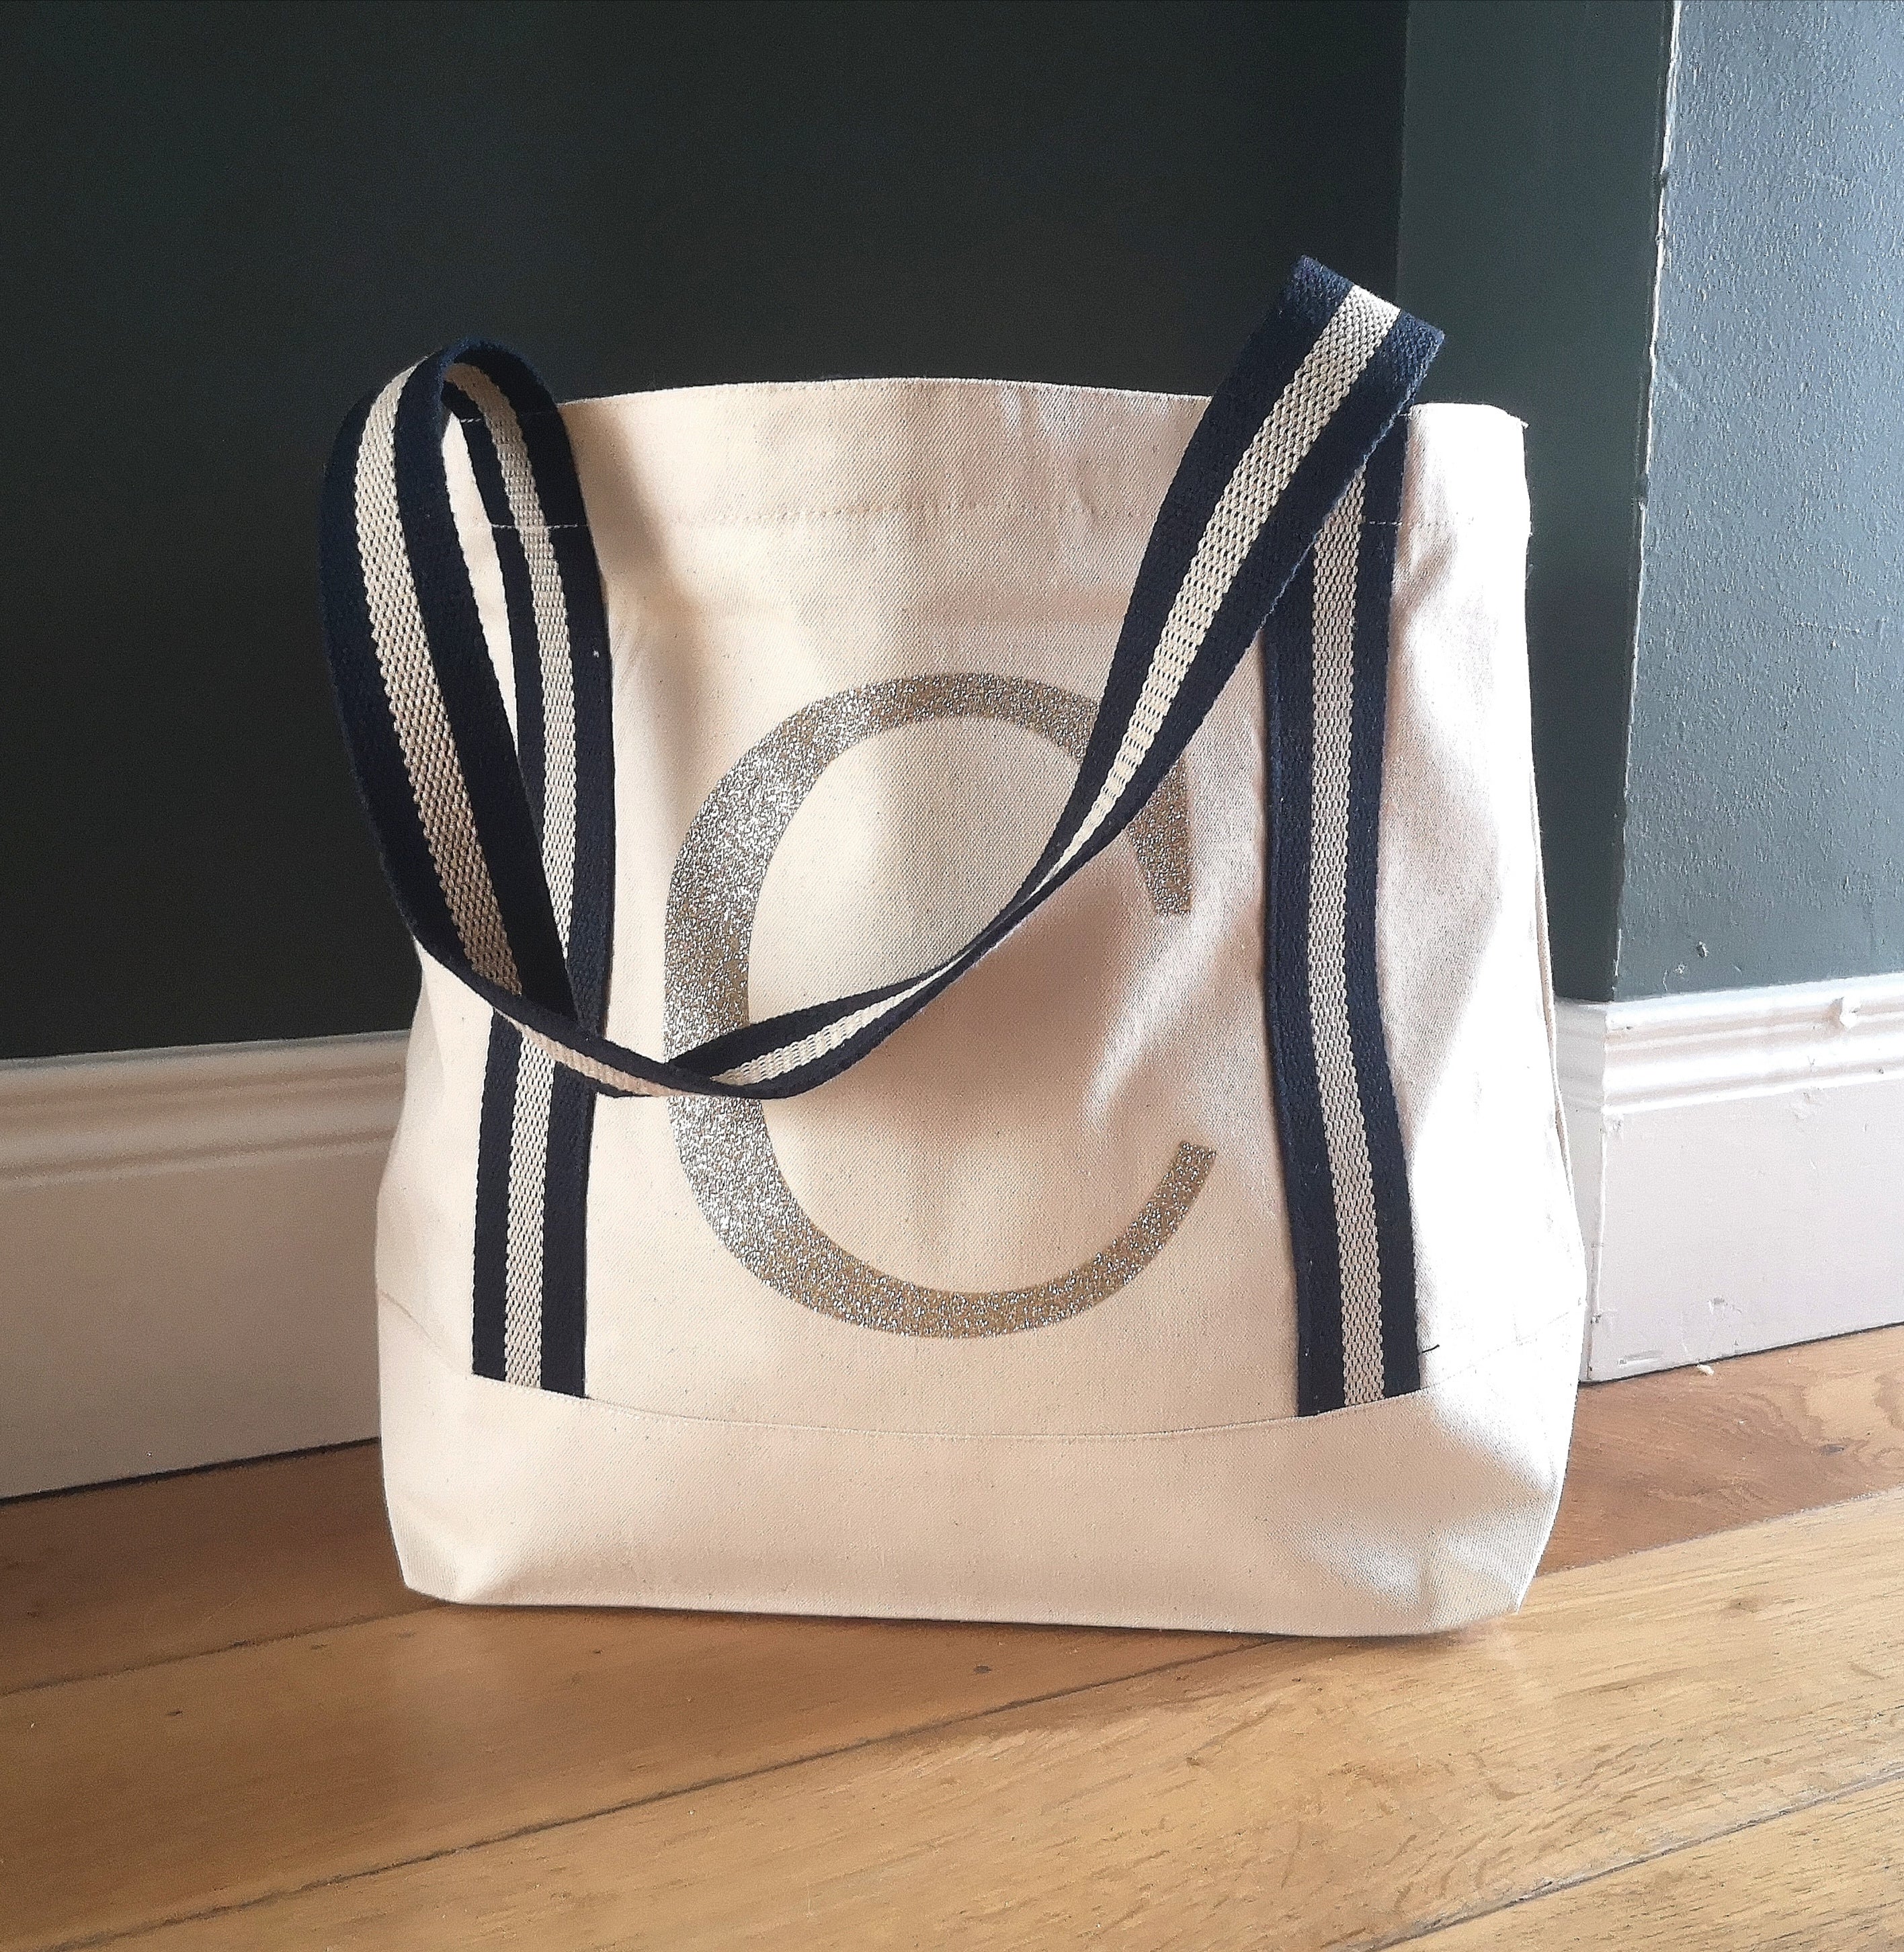 A Soft and sturdy natural cotton tote with navy and sparkly gold handles and a big personalised initial on the front in textured gold glitter